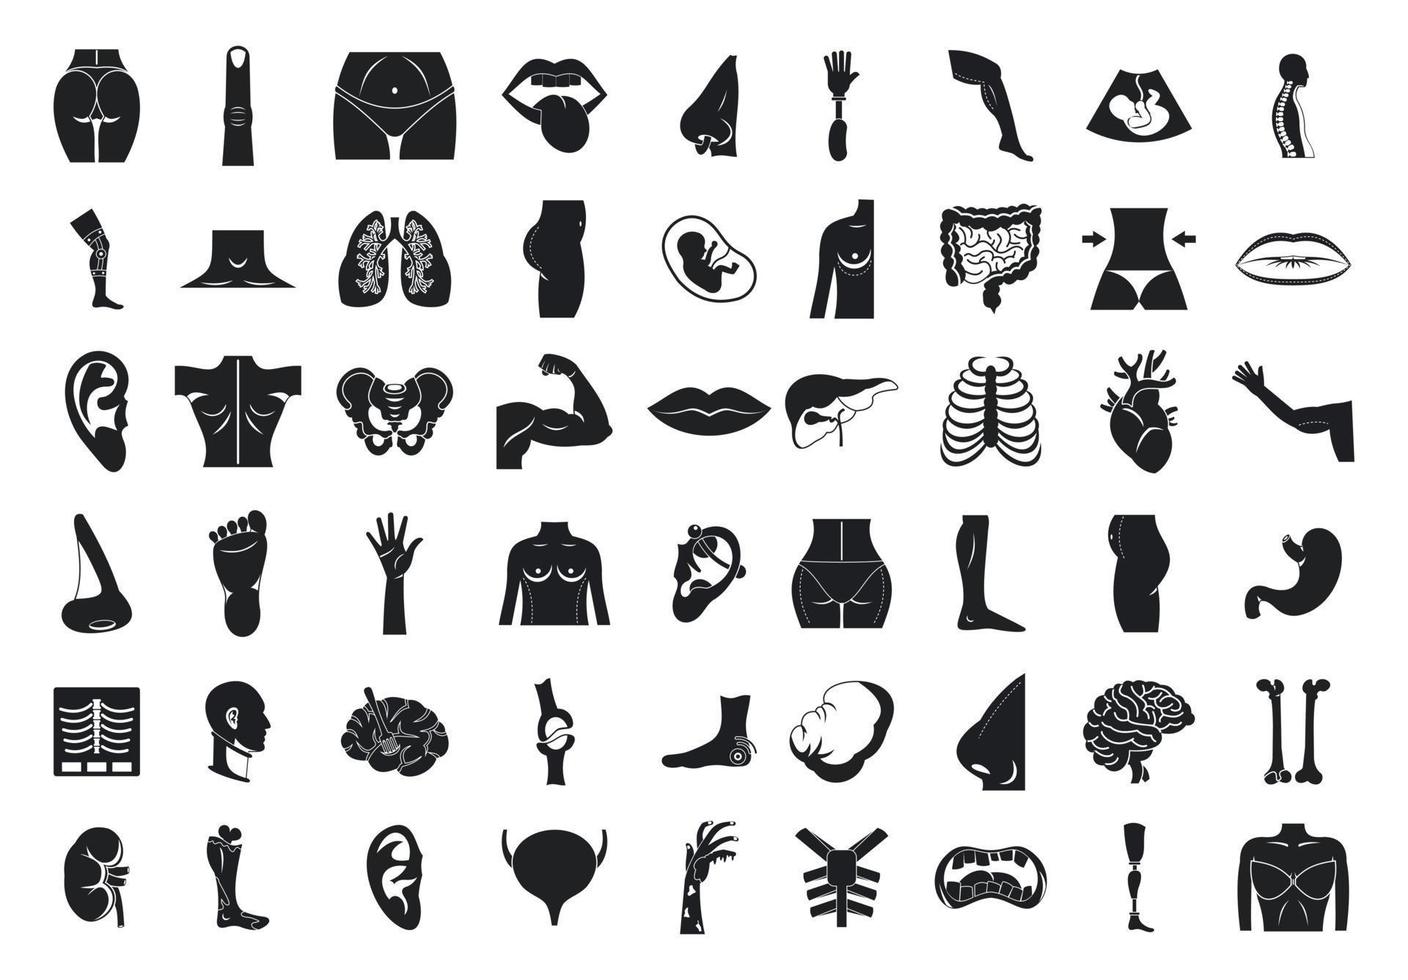 Human body icon set, simple style vector